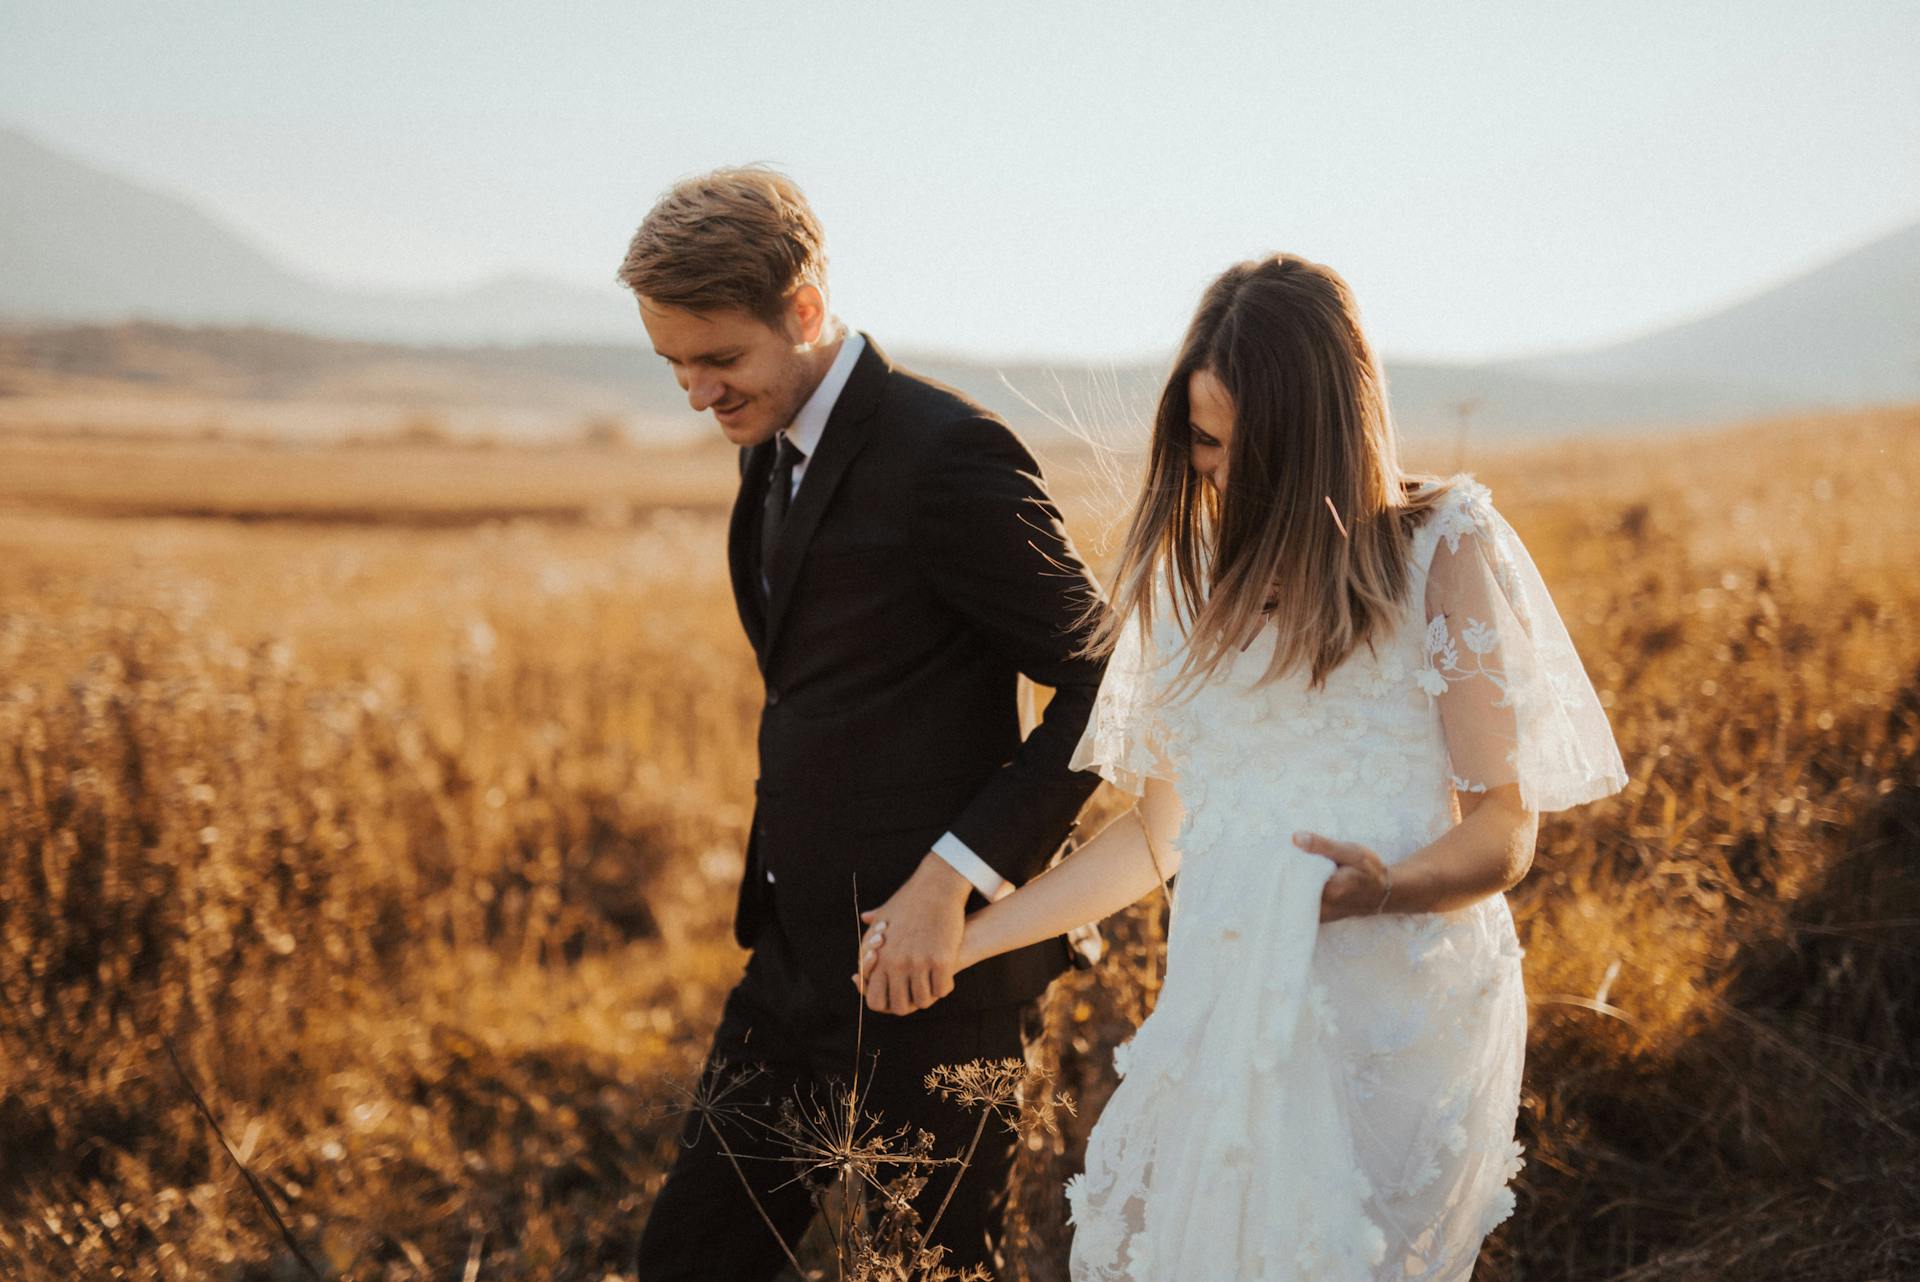 A bride and groom holding hands in a field | Source: Pexels